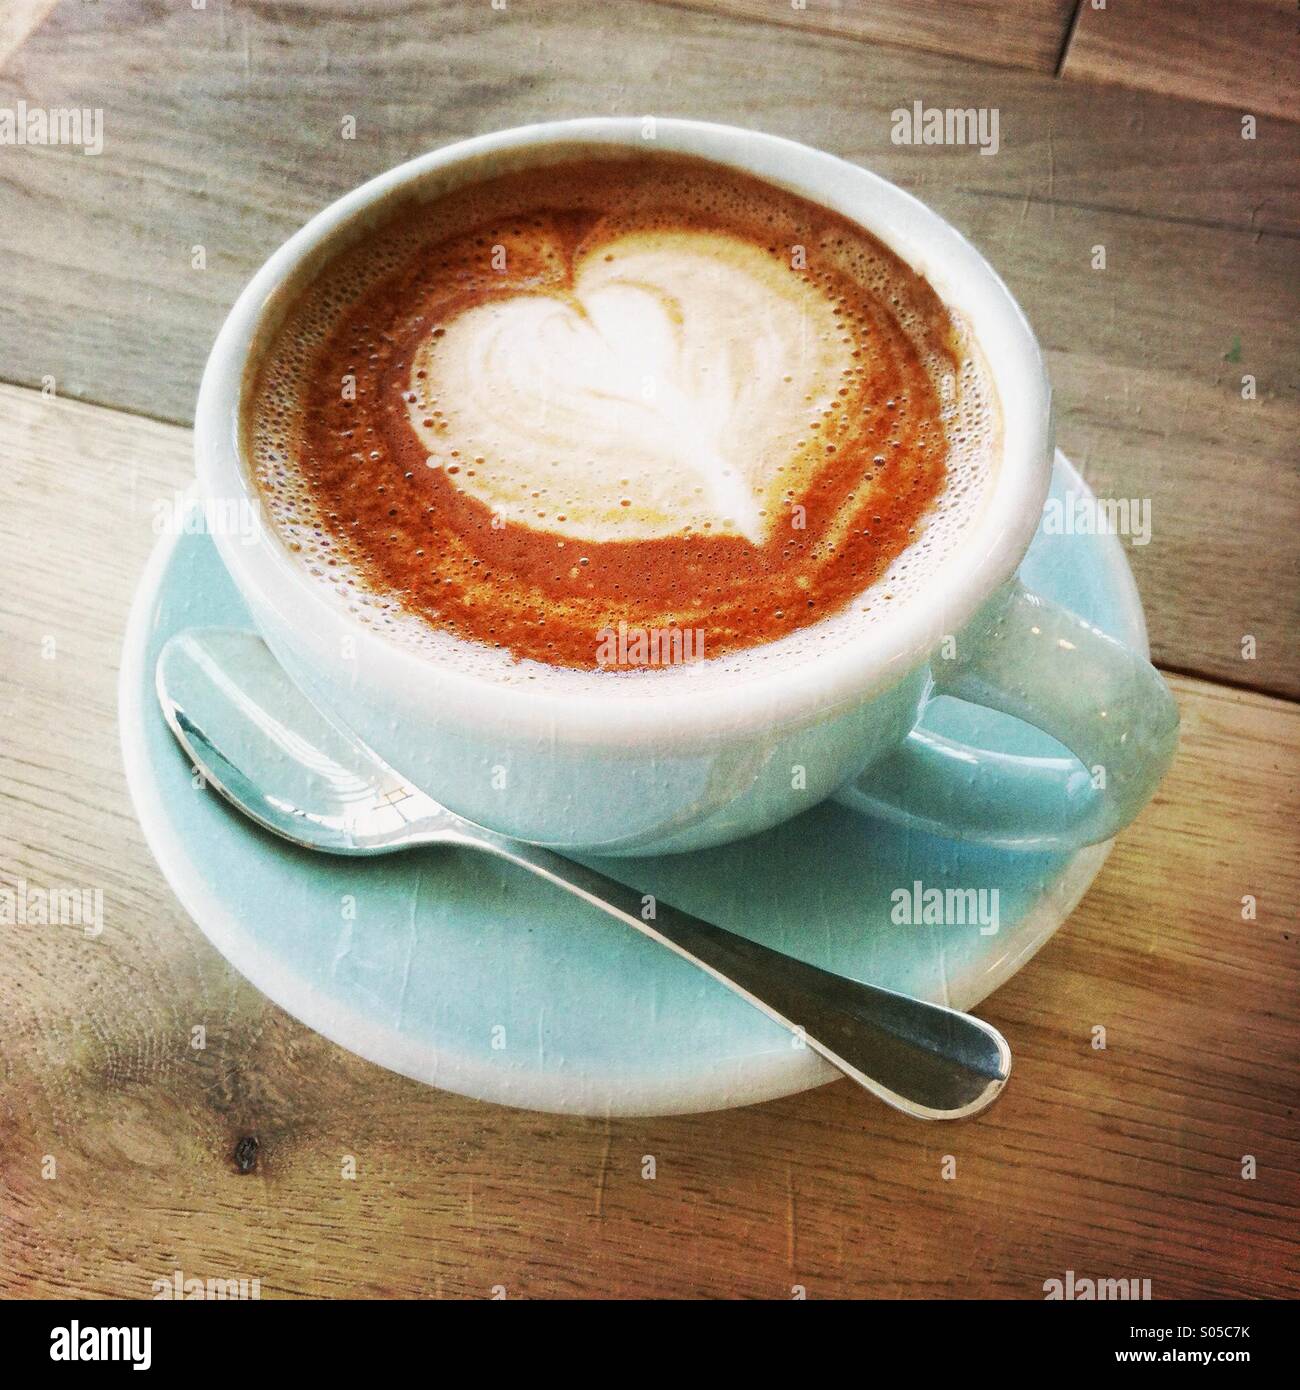 A cup of latte/cafe mocha with a heart shaped on the top. Stock Photo